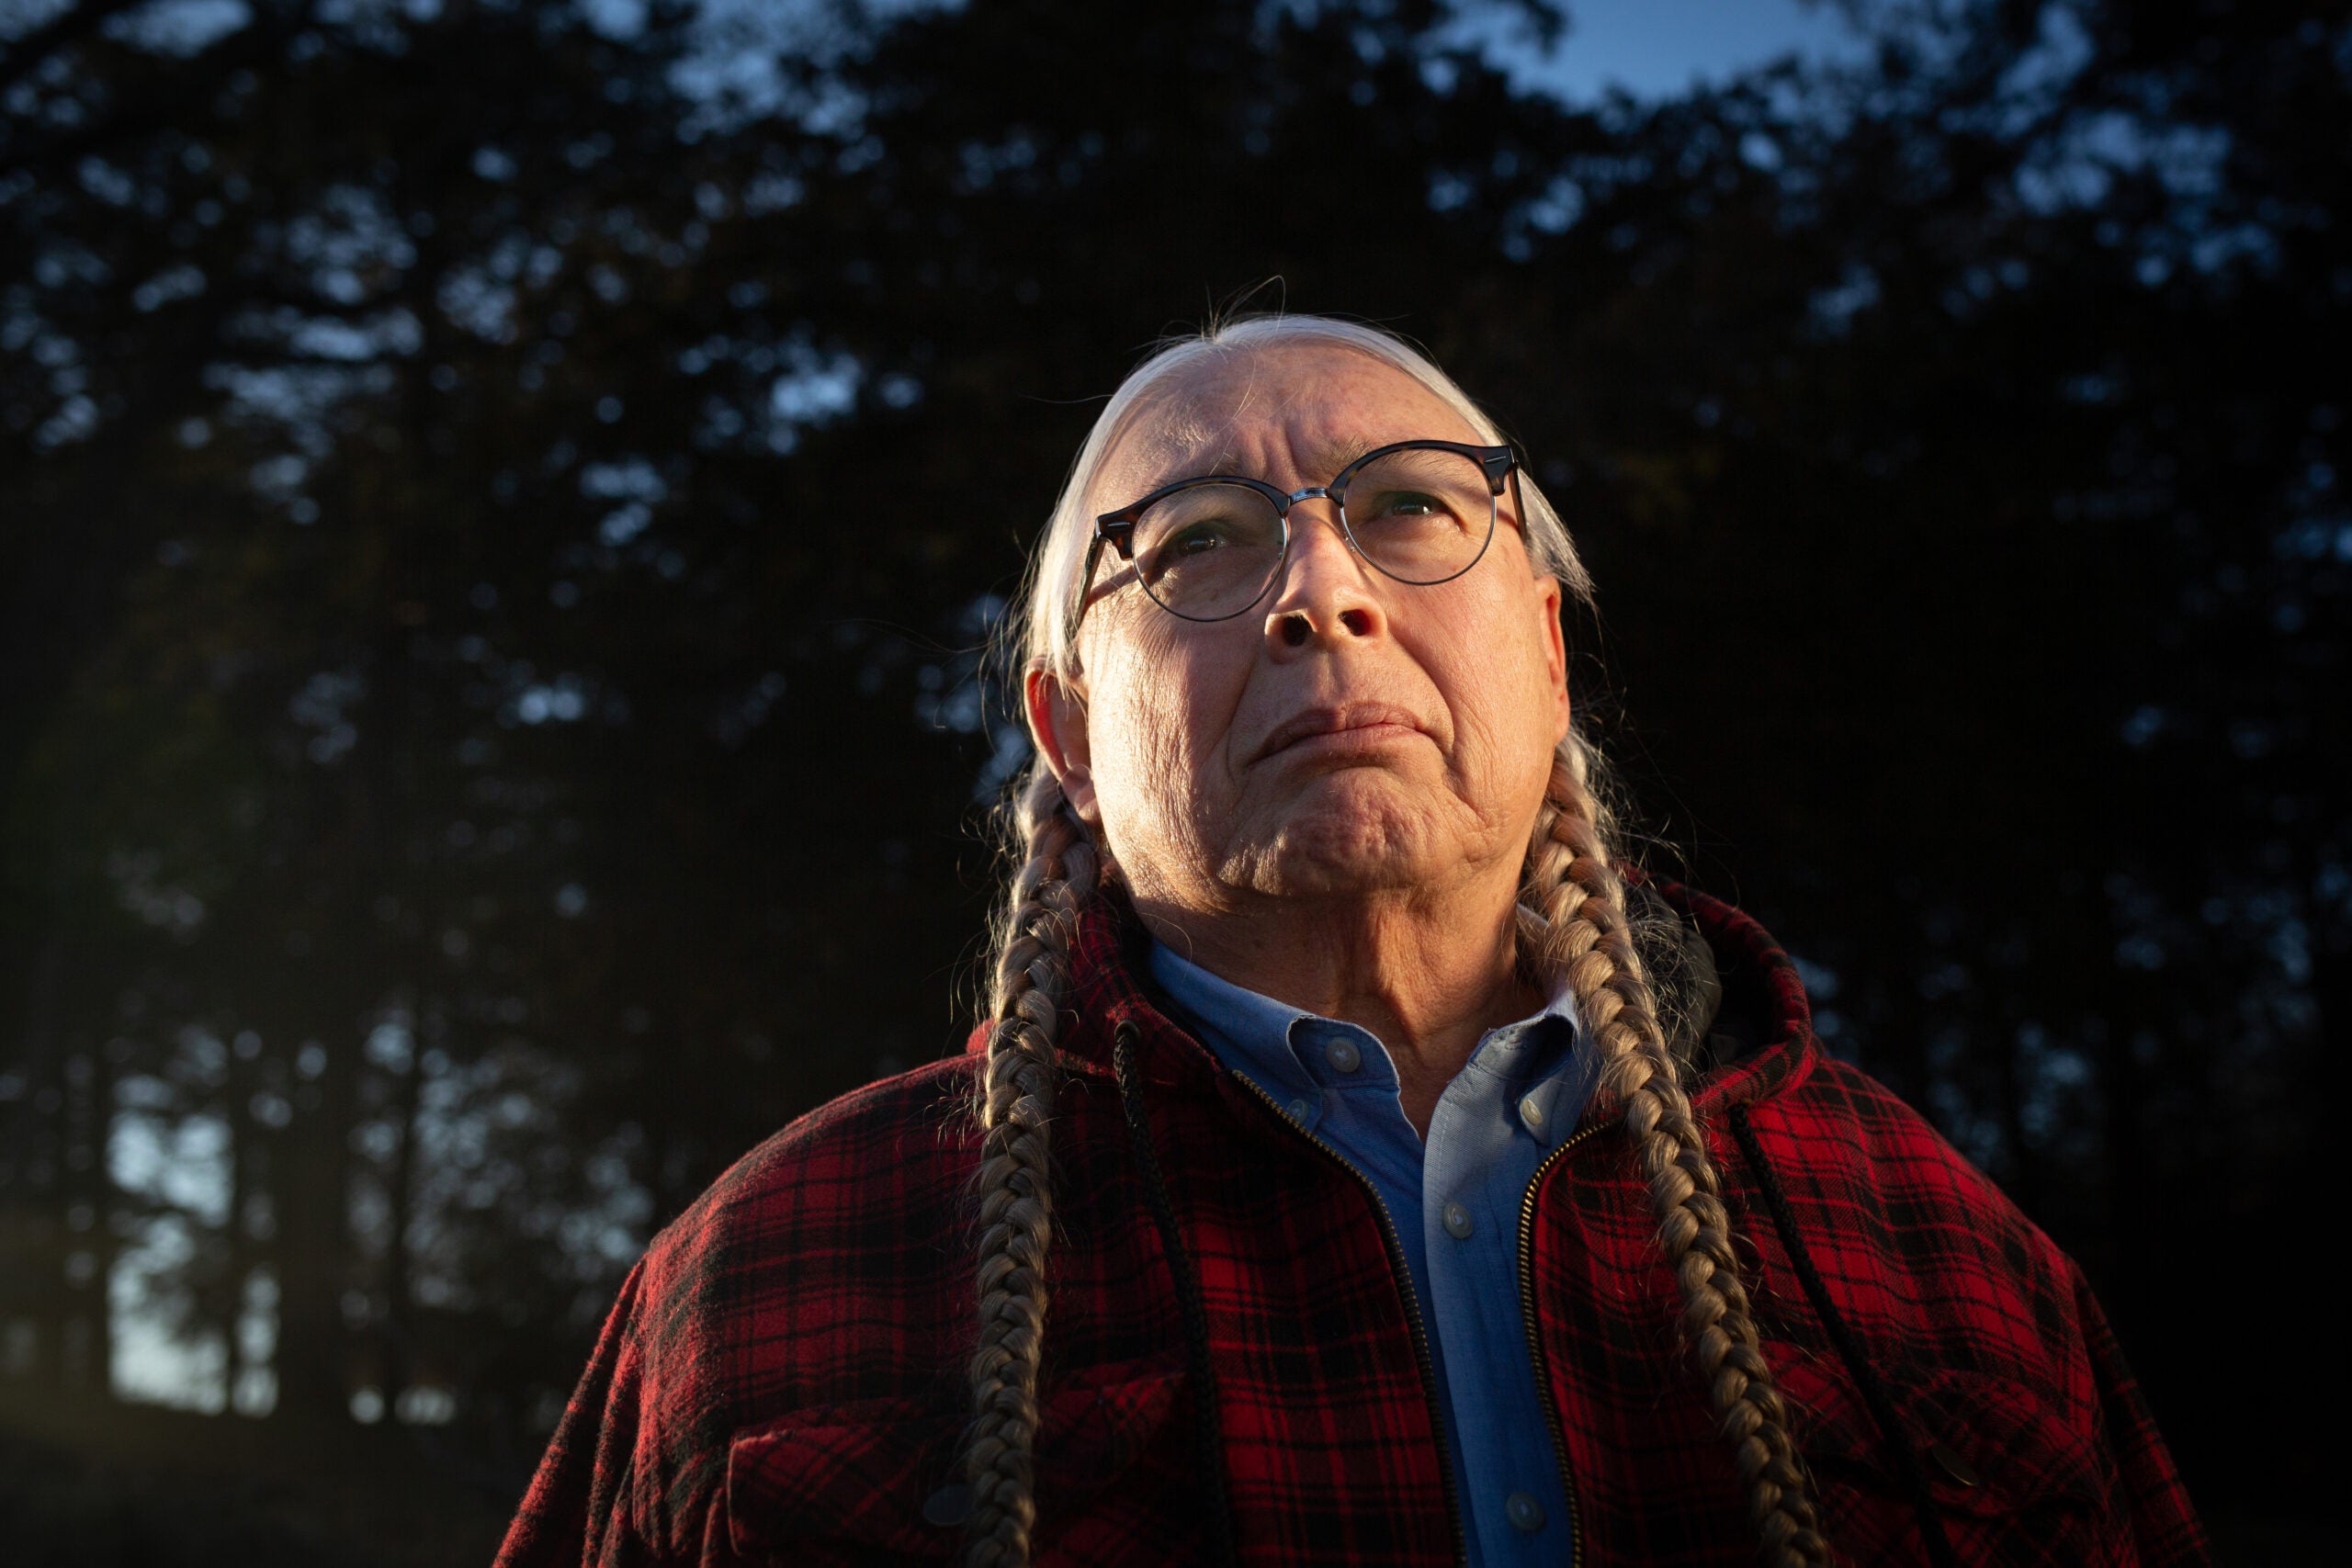 Walter Echo-Hawk, a member of the Pawnee Nation of Oklahoma, discovered in 2015 that government agencies had approved oil and gas leases on Pawnee land without telling the tribe.